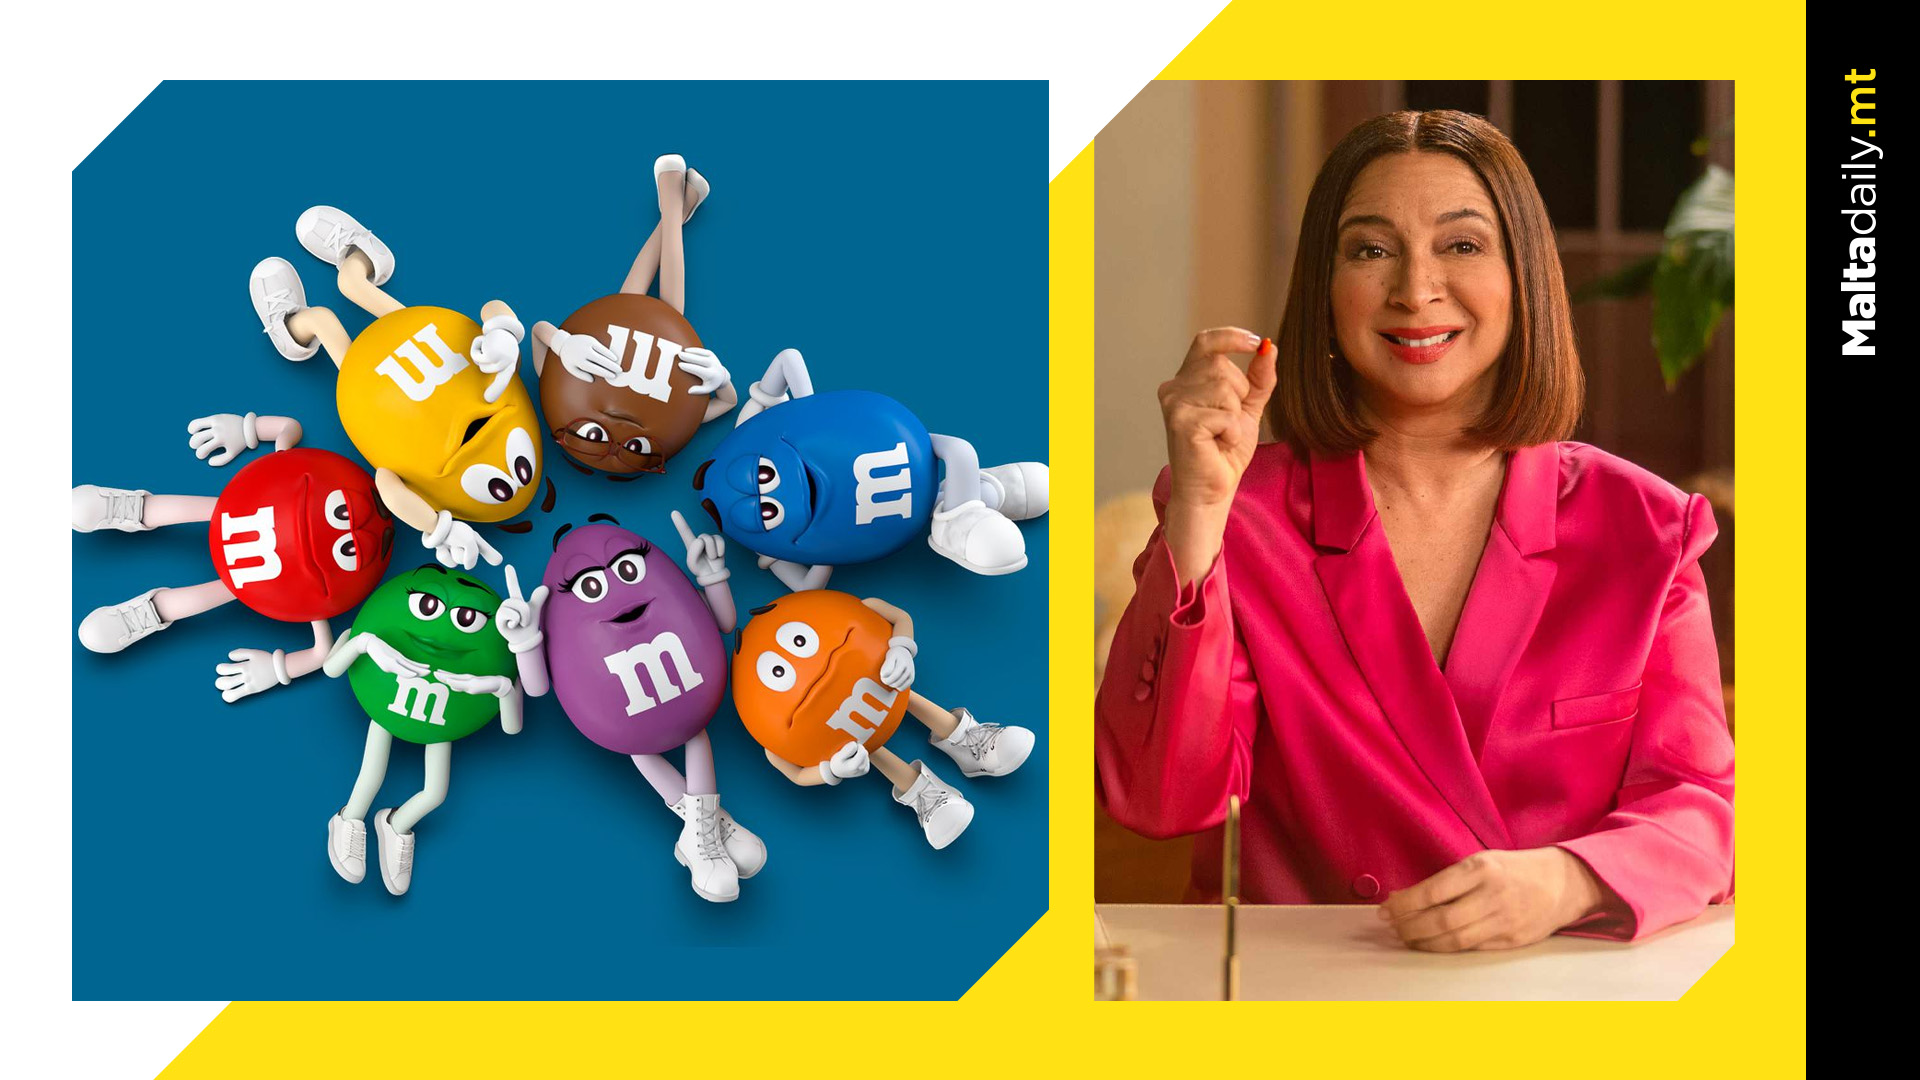 Actress Maya Rudolph to replace M&M's colorful spokescandies